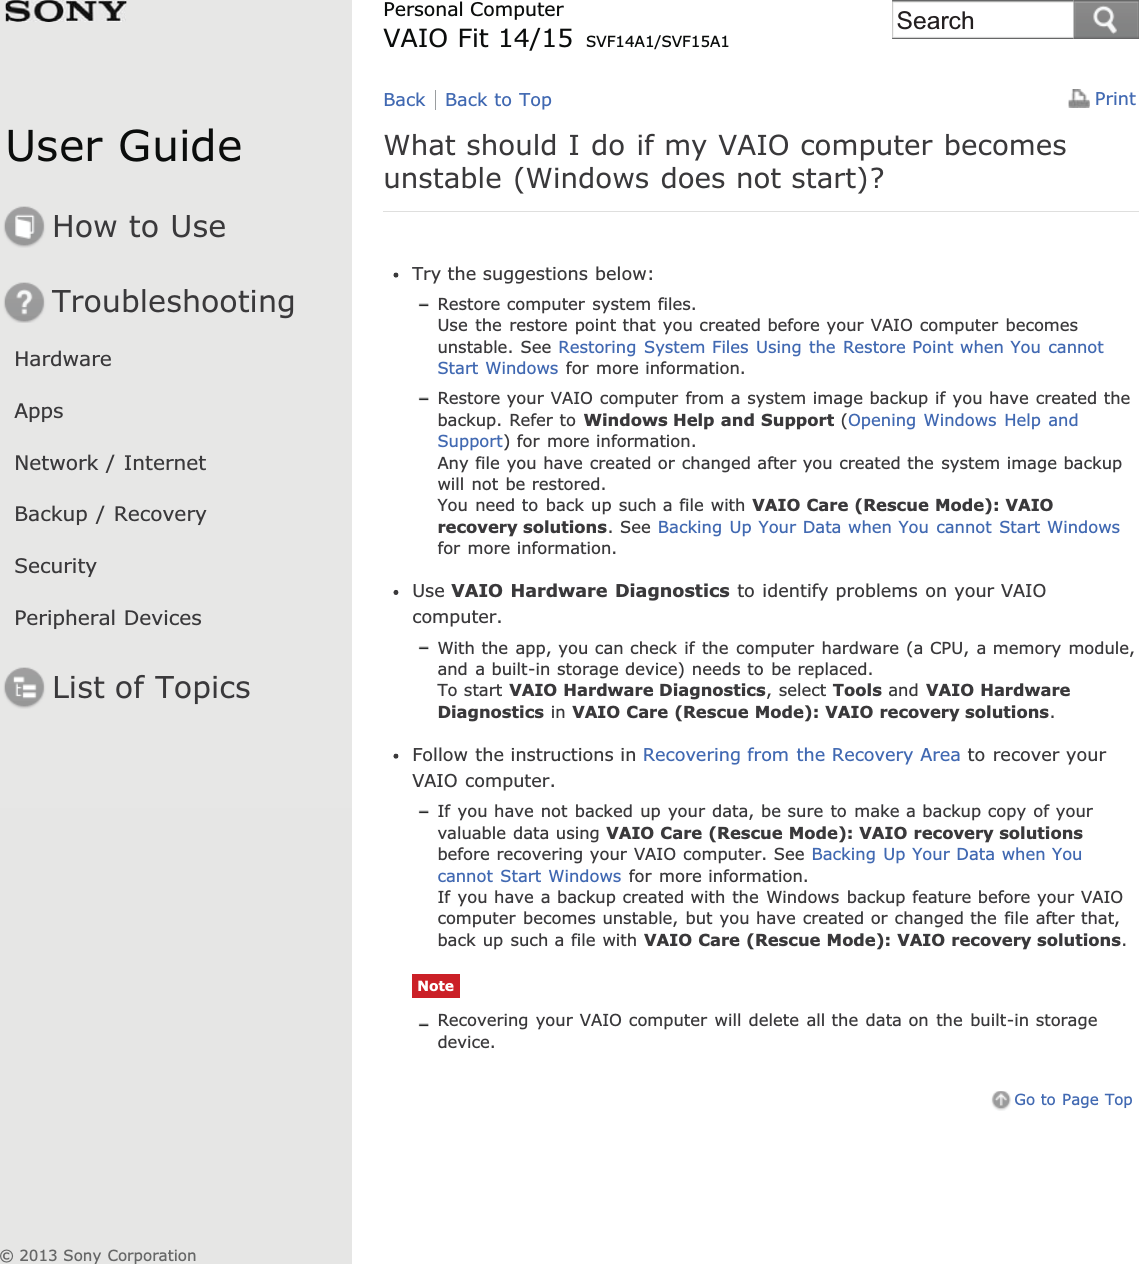 User GuideHow to UseTroubleshootingHardwareAppsNetwork / InternetBackup / RecoverySecurityPeripheral DevicesList of TopicsPrintPersonal ComputerVAIO Fit 14/15 SVF14A1/SVF15A1What should I do if my VAIO computer becomesunstable (Windows does not start)?Try the suggestions below:Restore computer system files.Use the restore point that you created before your VAIO computer becomesunstable. See Restoring System Files Using the Restore Point when You cannotStart Windows for more information.Restore your VAIO computer from a system image backup if you have created thebackup. Refer to Windows Help and Support (Opening Windows Help andSupport) for more information.Any file you have created or changed after you created the system image backupwill not be restored.You need to back up such a file with VAIO Care (Rescue Mode): VAIOrecovery solutions. See Backing Up Your Data when You cannot Start Windowsfor more information.Use VAIO Hardware Diagnostics to identify problems on your VAIOcomputer.With the app, you can check if the computer hardware (a CPU, a memory module,and a built-in storage device) needs to be replaced.To start VAIO Hardware Diagnostics, select Tools and VAIO HardwareDiagnostics in VAIO Care (Rescue Mode): VAIO recovery solutions.Follow the instructions in Recovering from the Recovery Area to recover yourVAIO computer.If you have not backed up your data, be sure to make a backup copy of yourvaluable data using VAIO Care (Rescue Mode): VAIO recovery solutionsbefore recovering your VAIO computer. See Backing Up Your Data when Youcannot Start Windows for more information.If you have a backup created with the Windows backup feature before your VAIOcomputer becomes unstable, but you have created or changed the file after that,back up such a file with VAIO Care (Rescue Mode): VAIO recovery solutions.NoteRecovering your VAIO computer will delete all the data on the built-in storagedevice.Go to Page TopBack Back to Top© 2013 Sony CorporationSearch